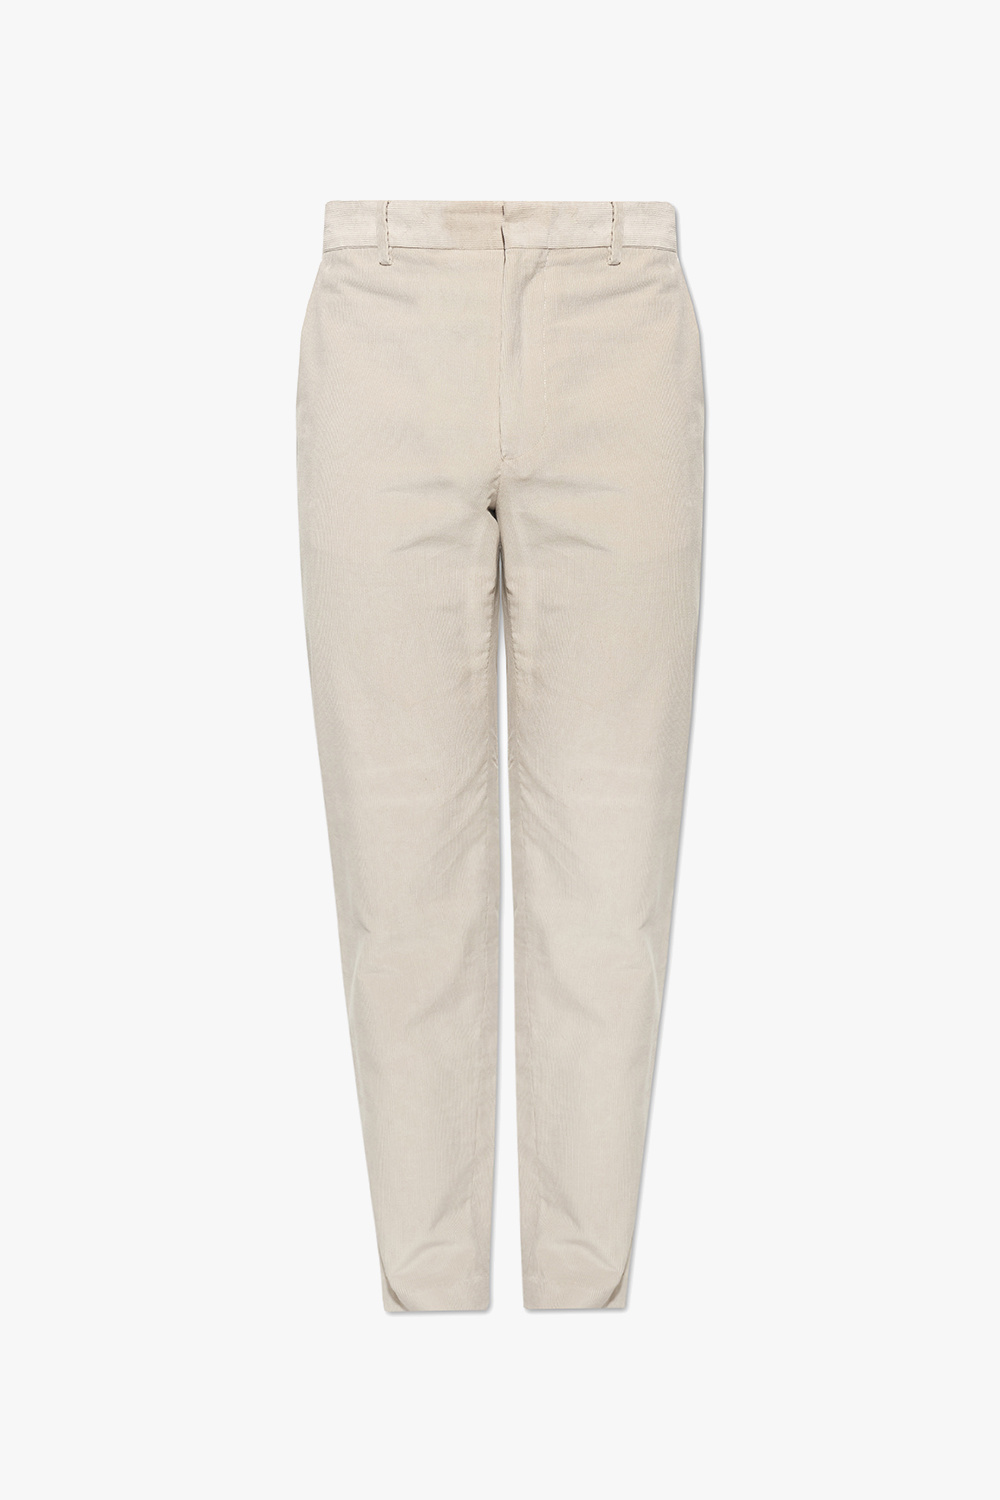 Paul Smith Ribbed nike trousers